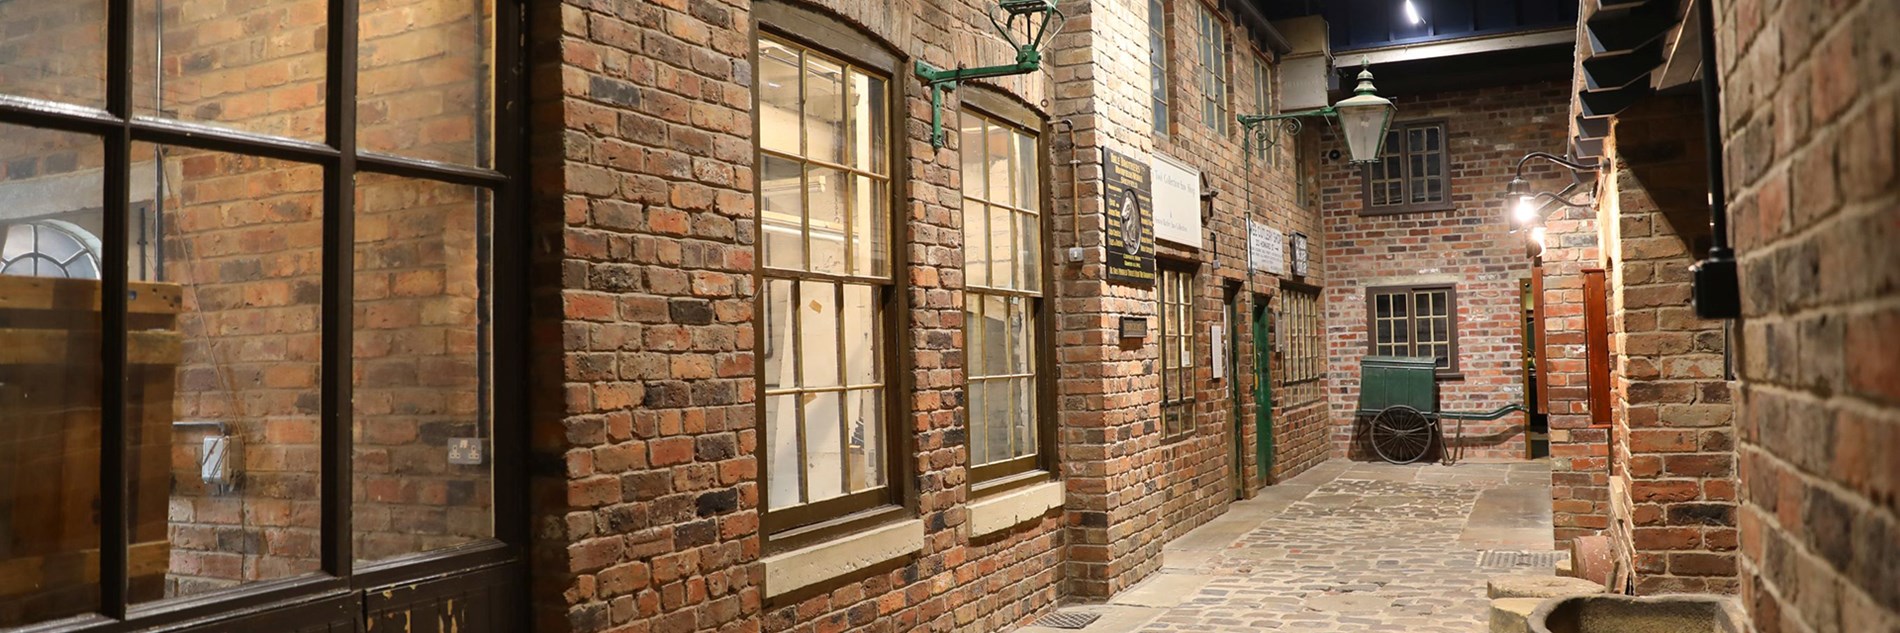 A perspective view along a restored cobbled street. The red brick walled workshops have multi-paned sash windows. There are two green wall mounted gas lamps and a green handcart at the end of the street.